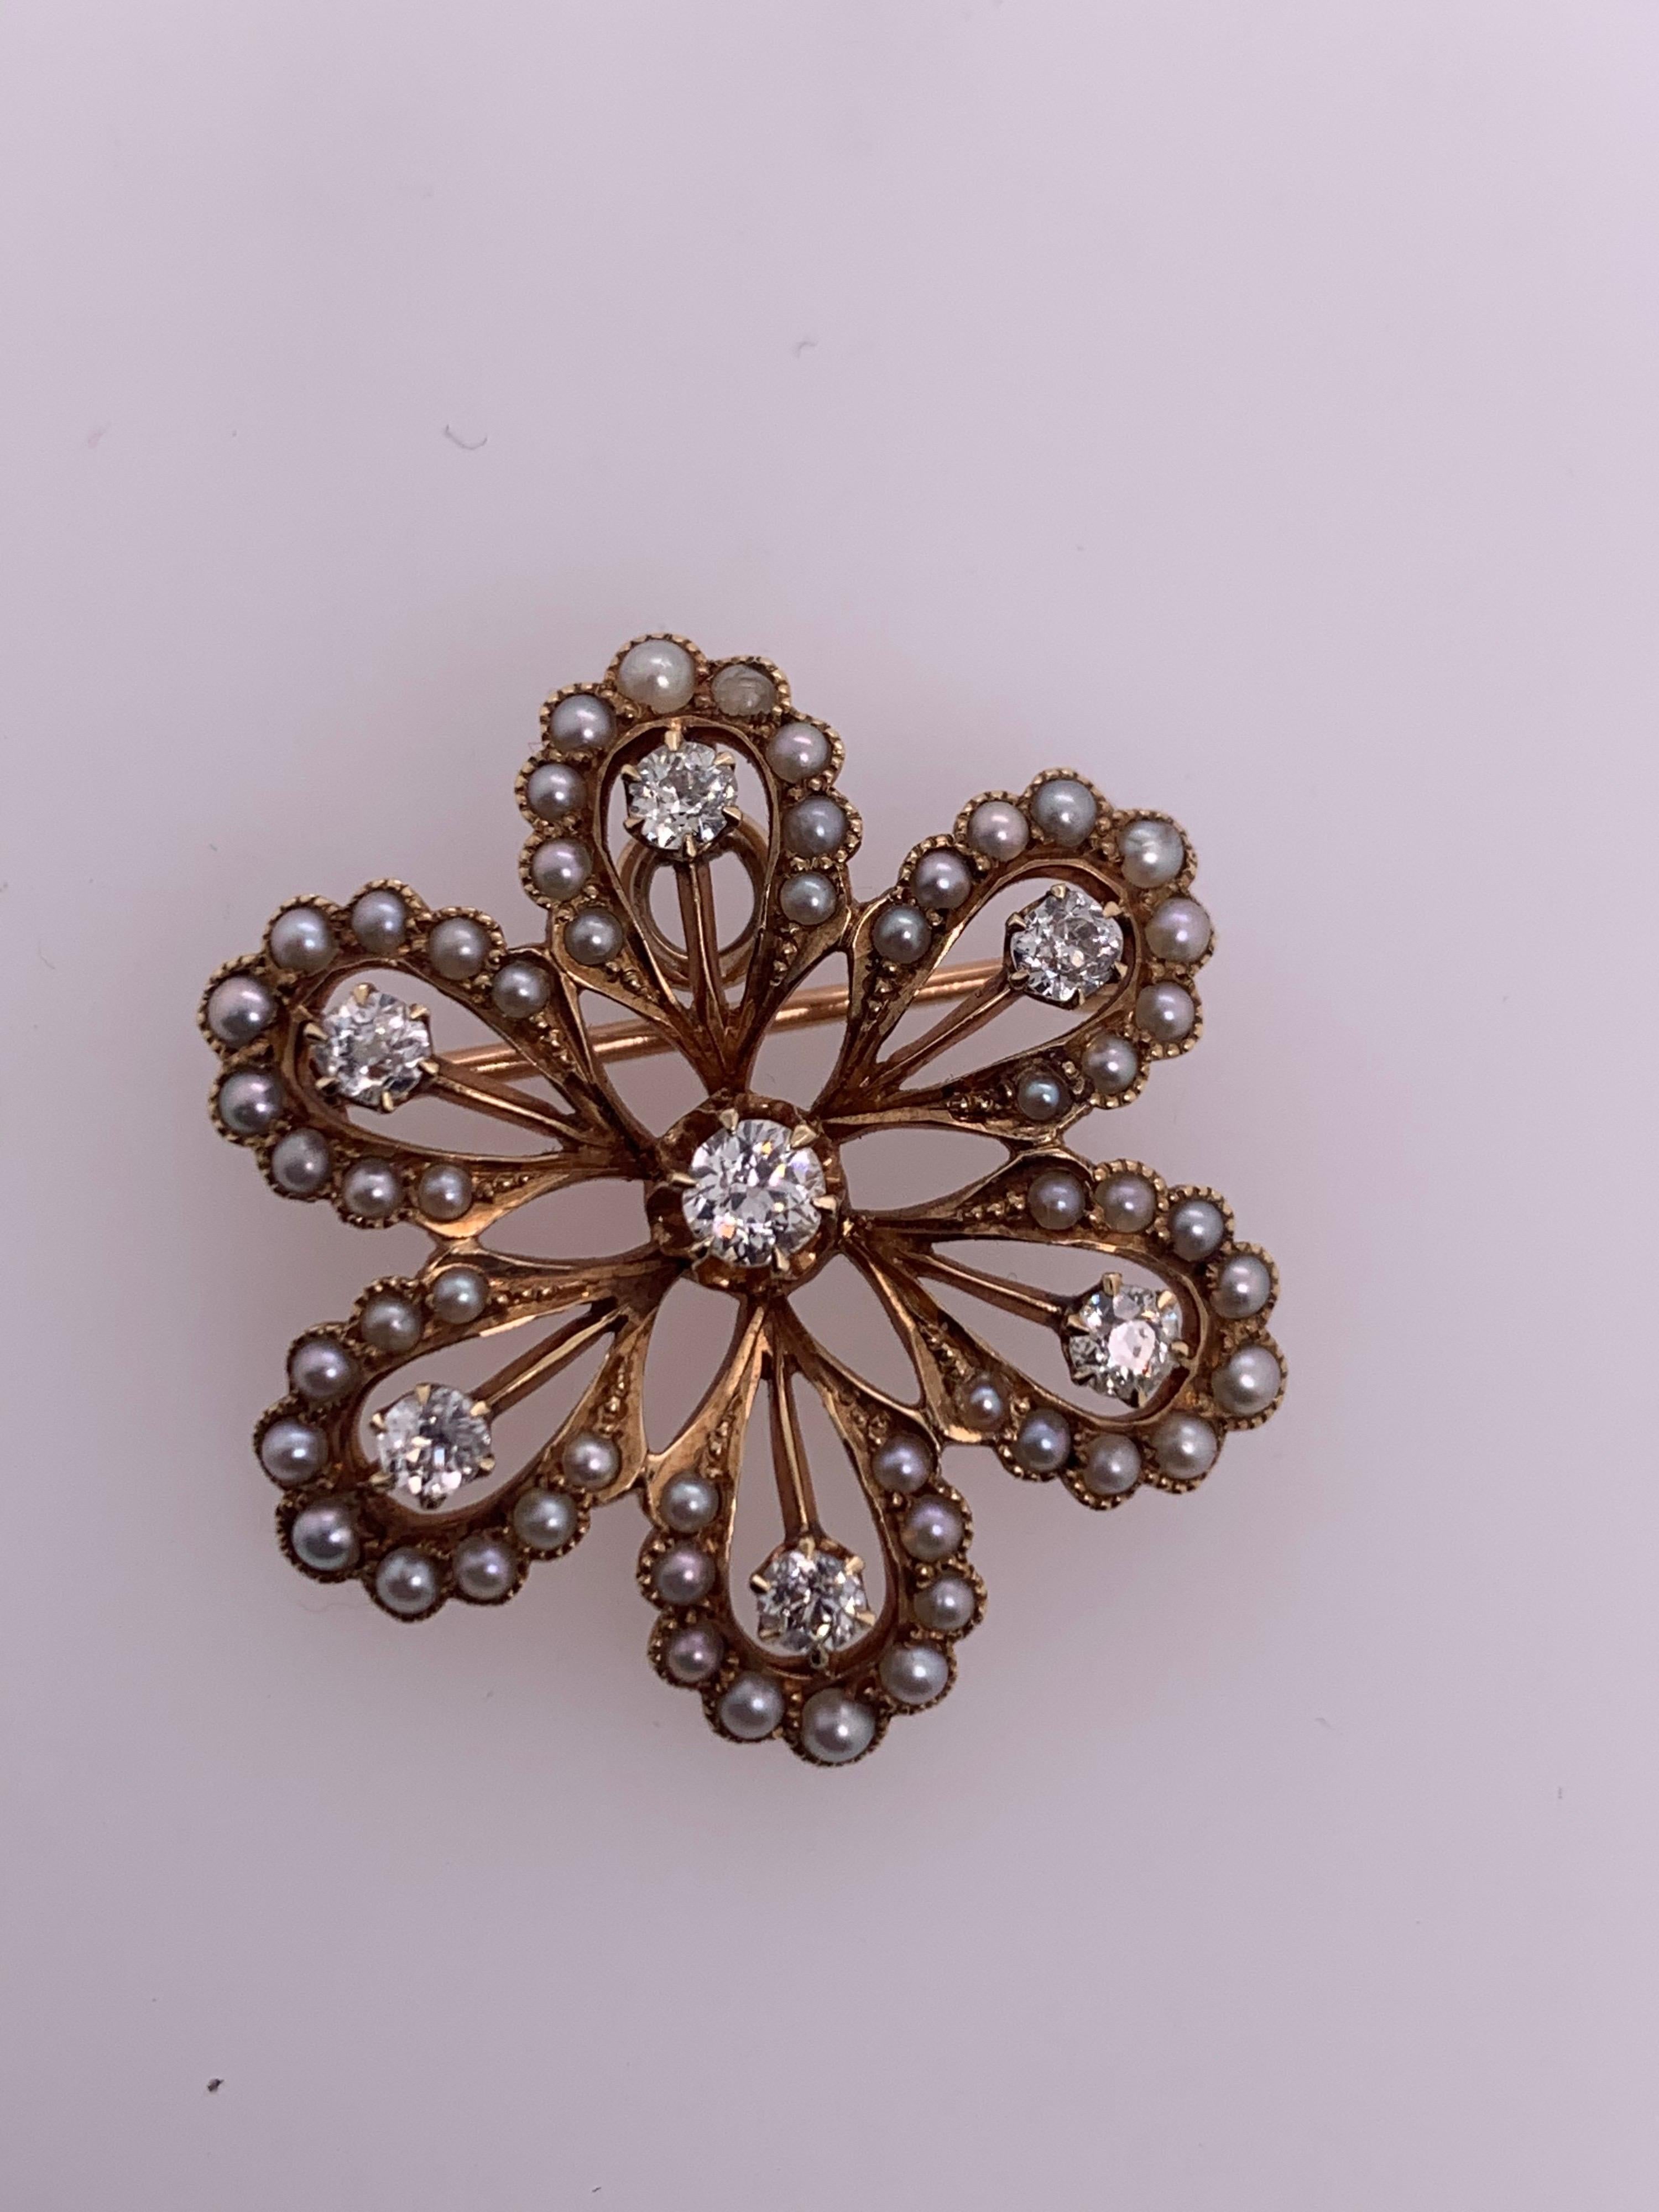 Victorian 14k Gold Pendant & Brooche, 0.65 Carat Natural Old European Diamond & Pearl Pin. The piece is set with 7 old euro diamonds, approximately F-G in color and VS-SI in clarity, ranging from 2.7-3.5mm. 

It is set with 54 pearls and weighs 6